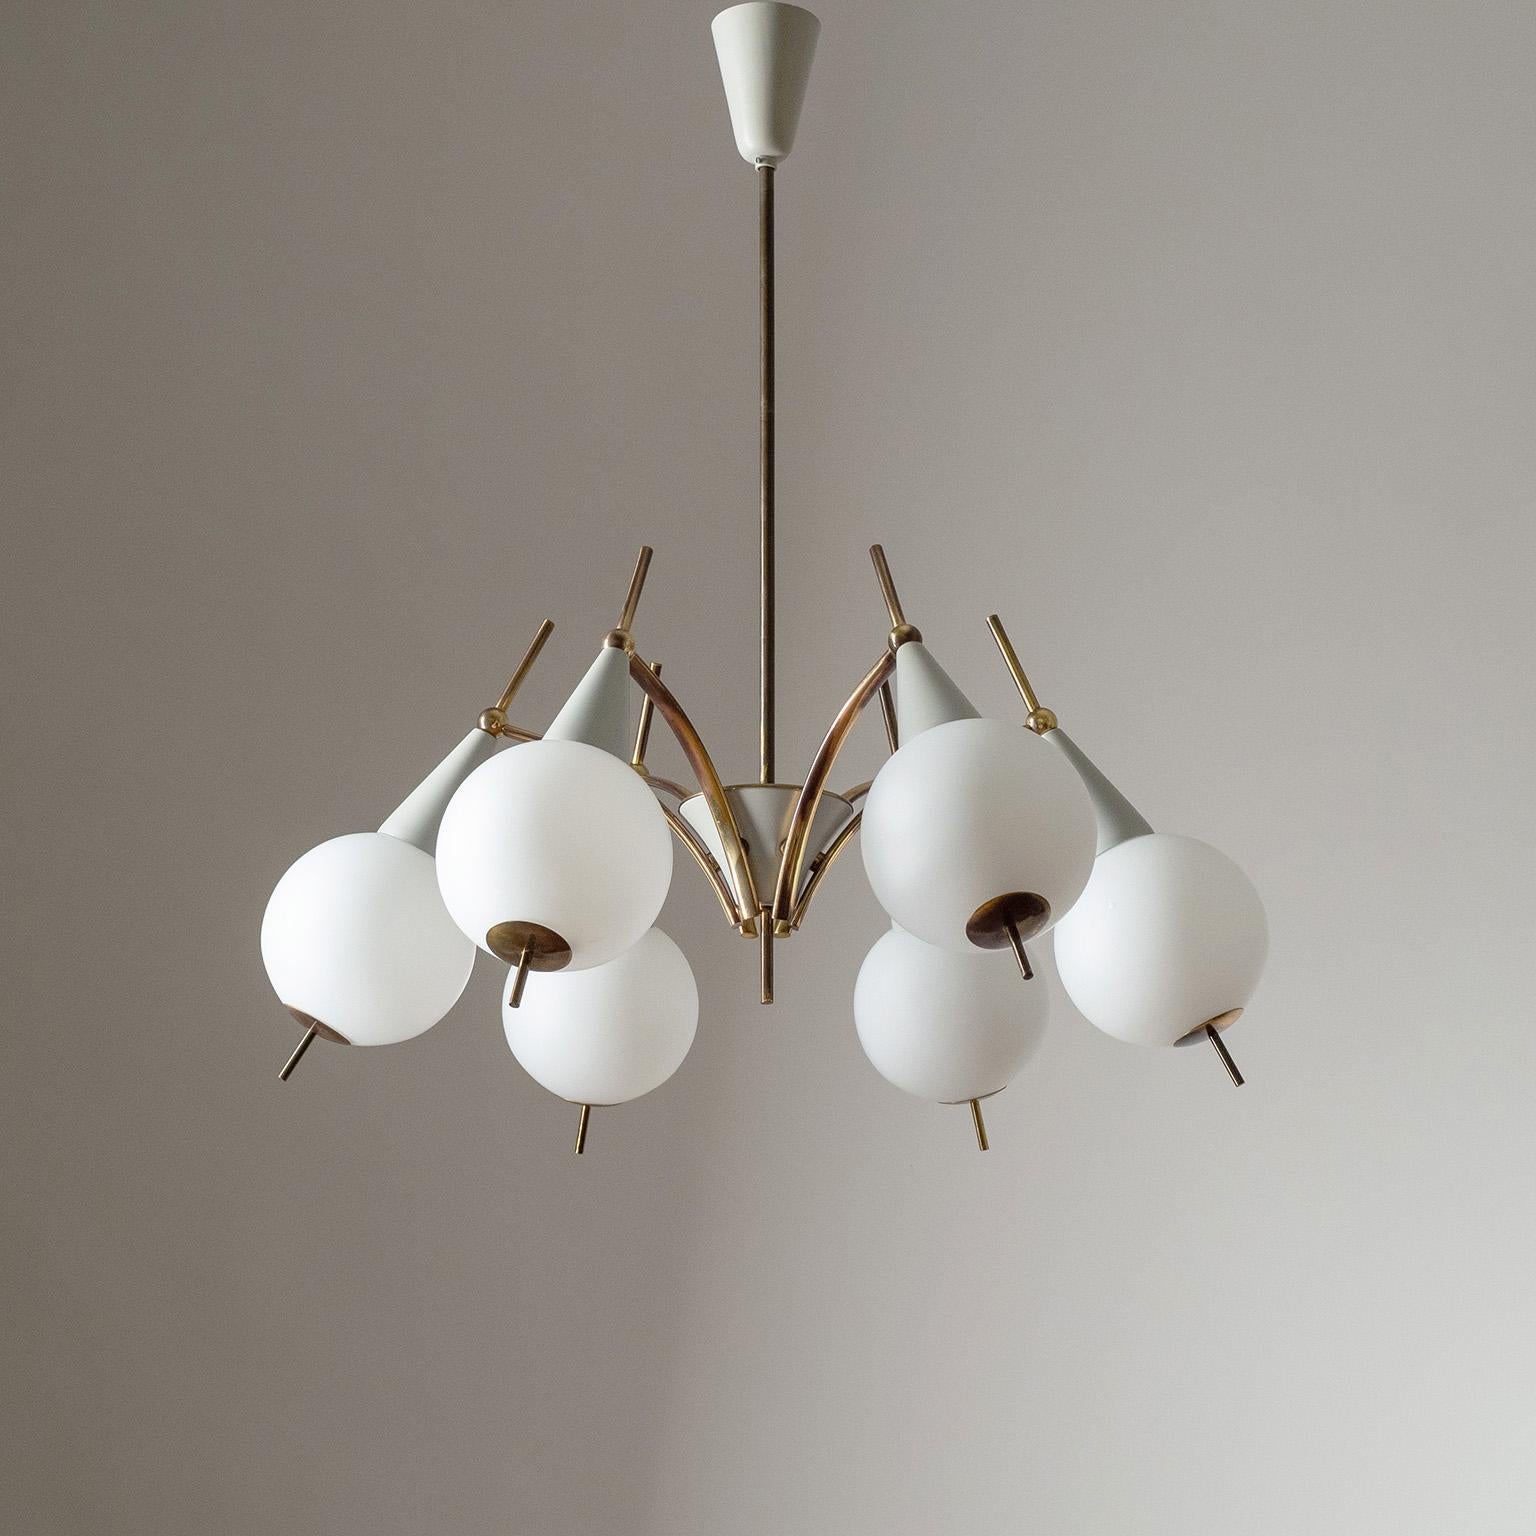 Fine Italian six-arm chandelier by G.C.M.E., from the 1950-1960s. Polished brass structure with grey lackered elements and blown satin glass globes with brass finials. Very nice original condition with some patina on the brass and barely any wear to